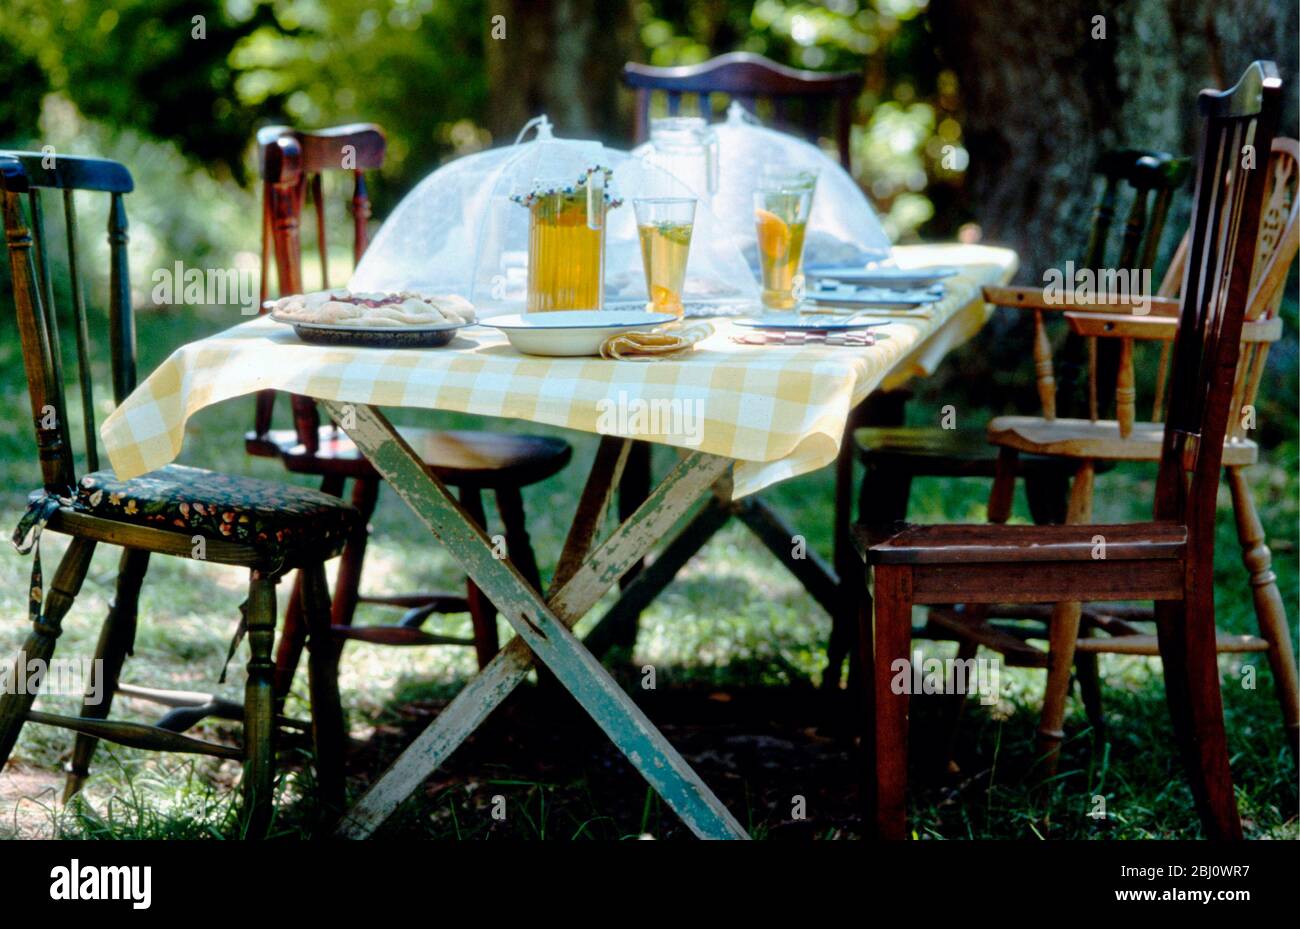 Comfortable old table and chairs set out under a tree in the sun for a picnic meal - Stock Photo